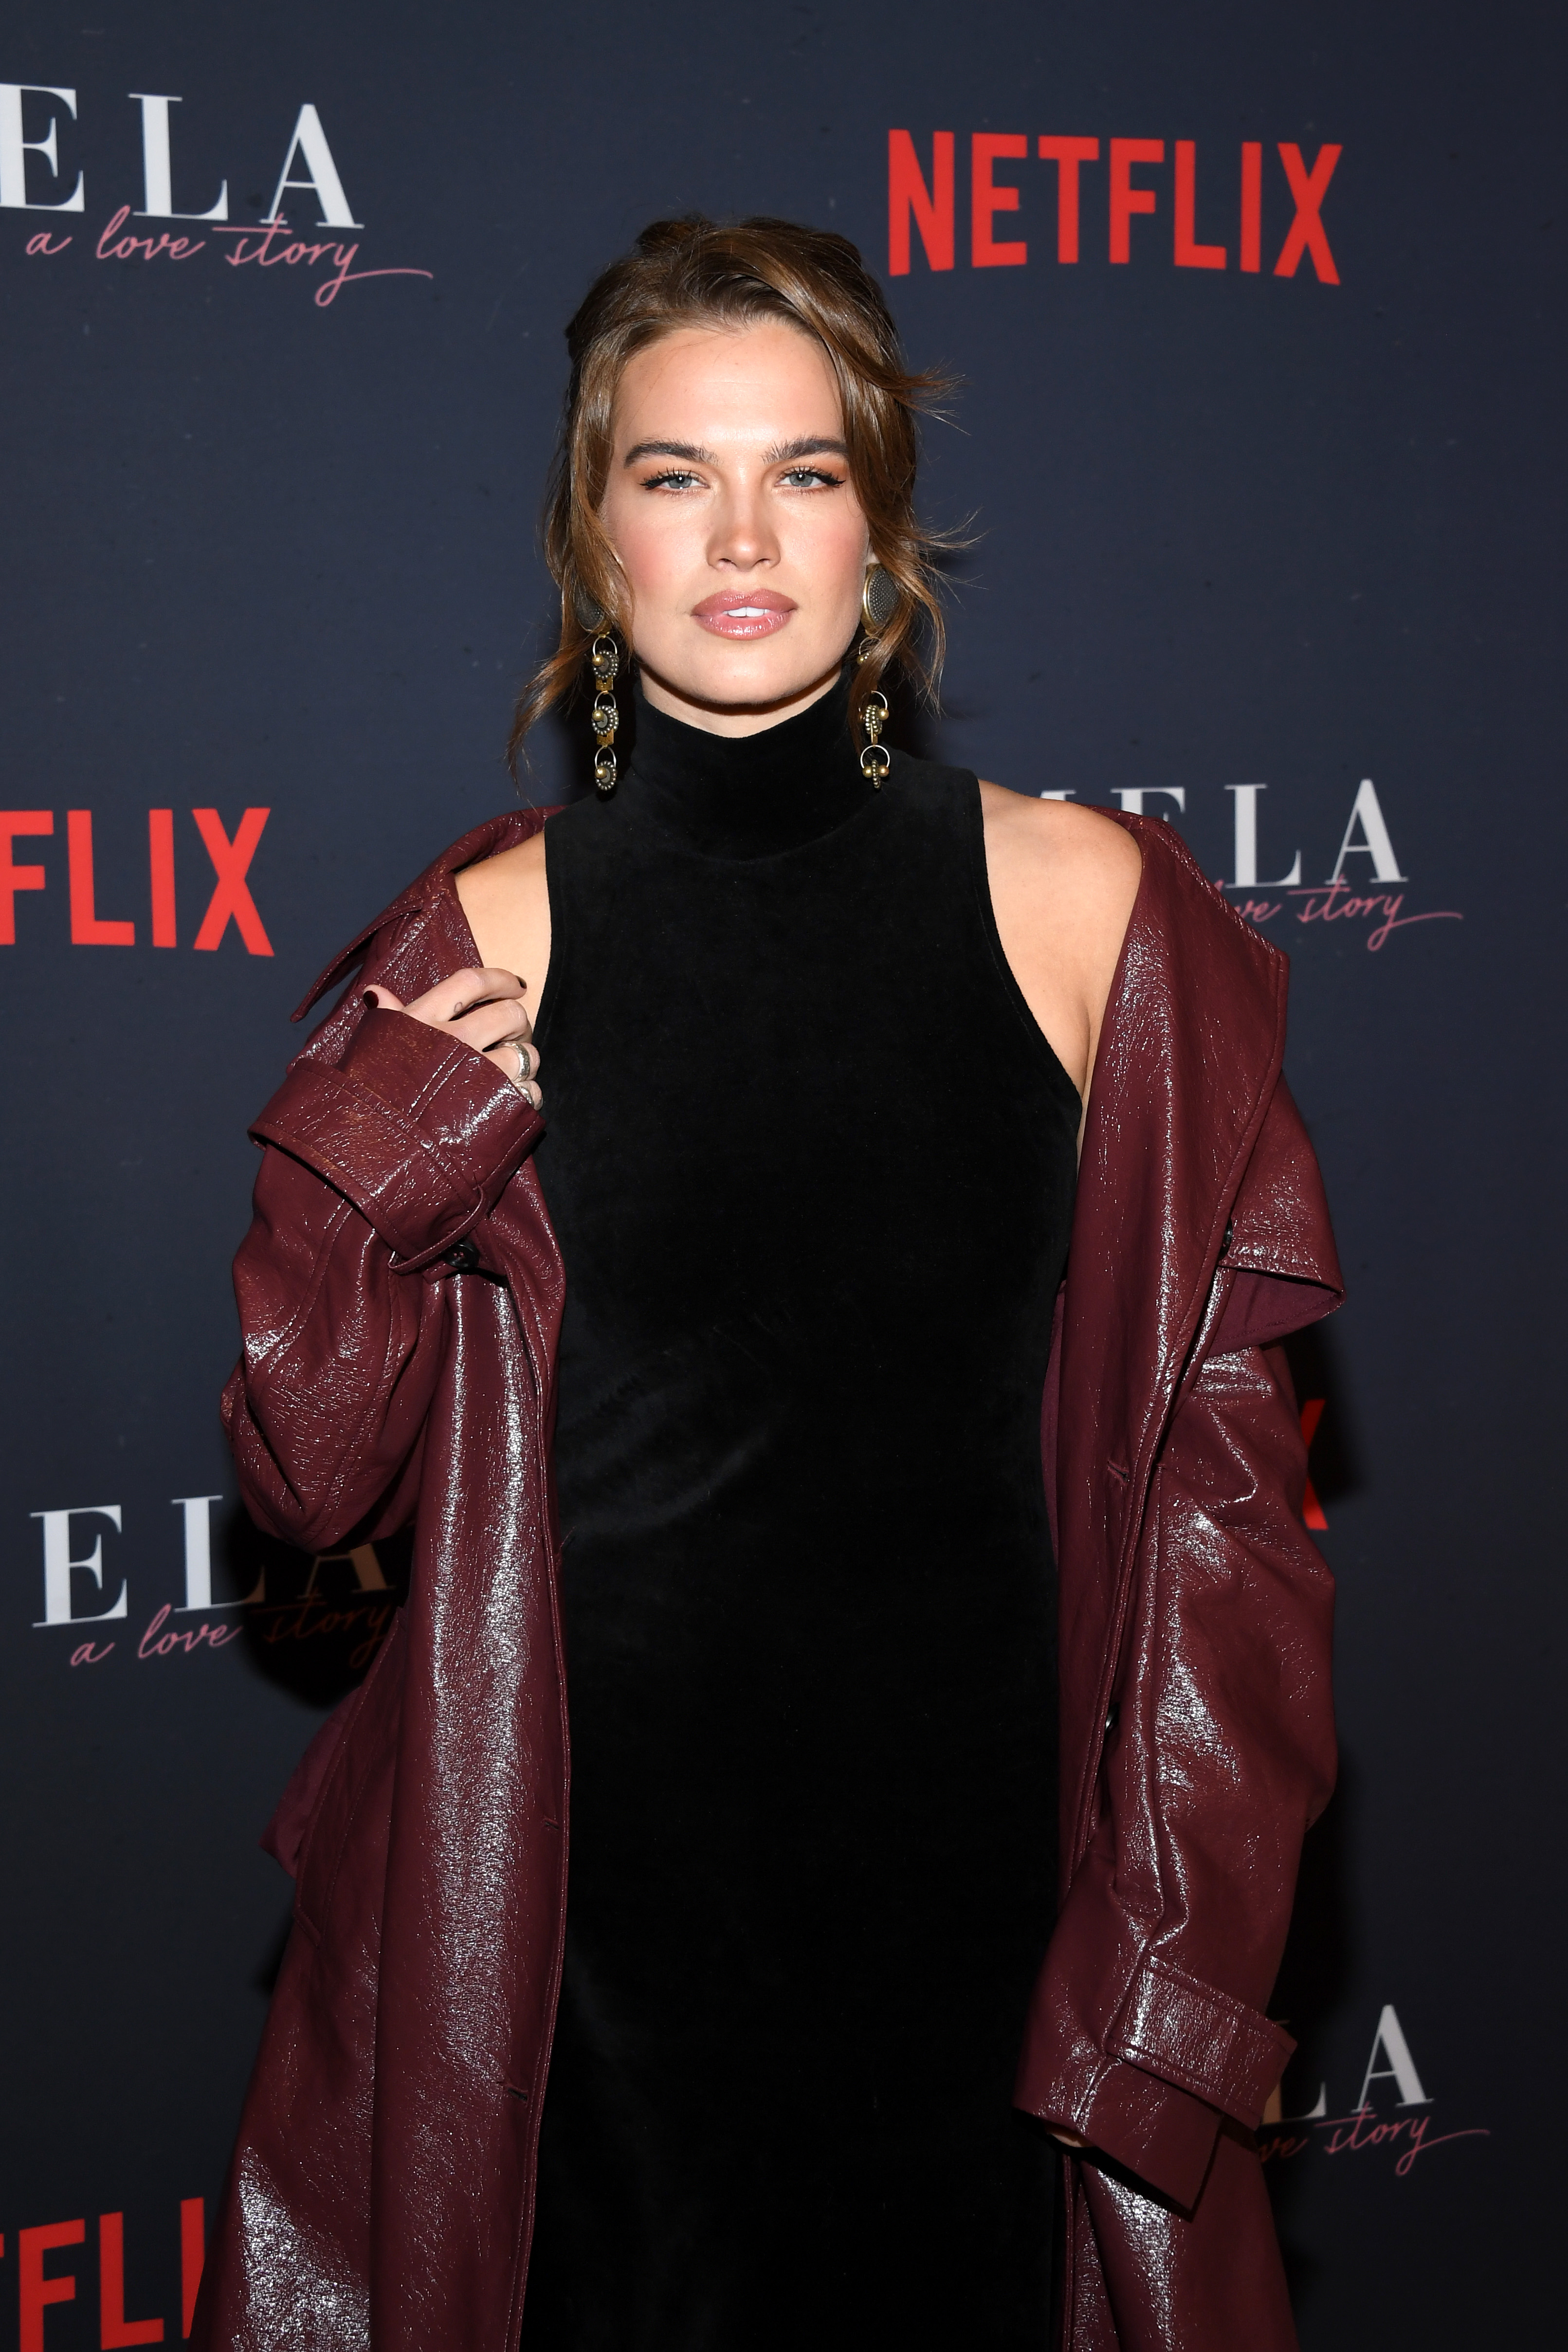 Stormi Bree at the premiere of Netflix's "Pamela, a love story" on January 30, 2023, in Hollywood, California. | Source: Getty Images